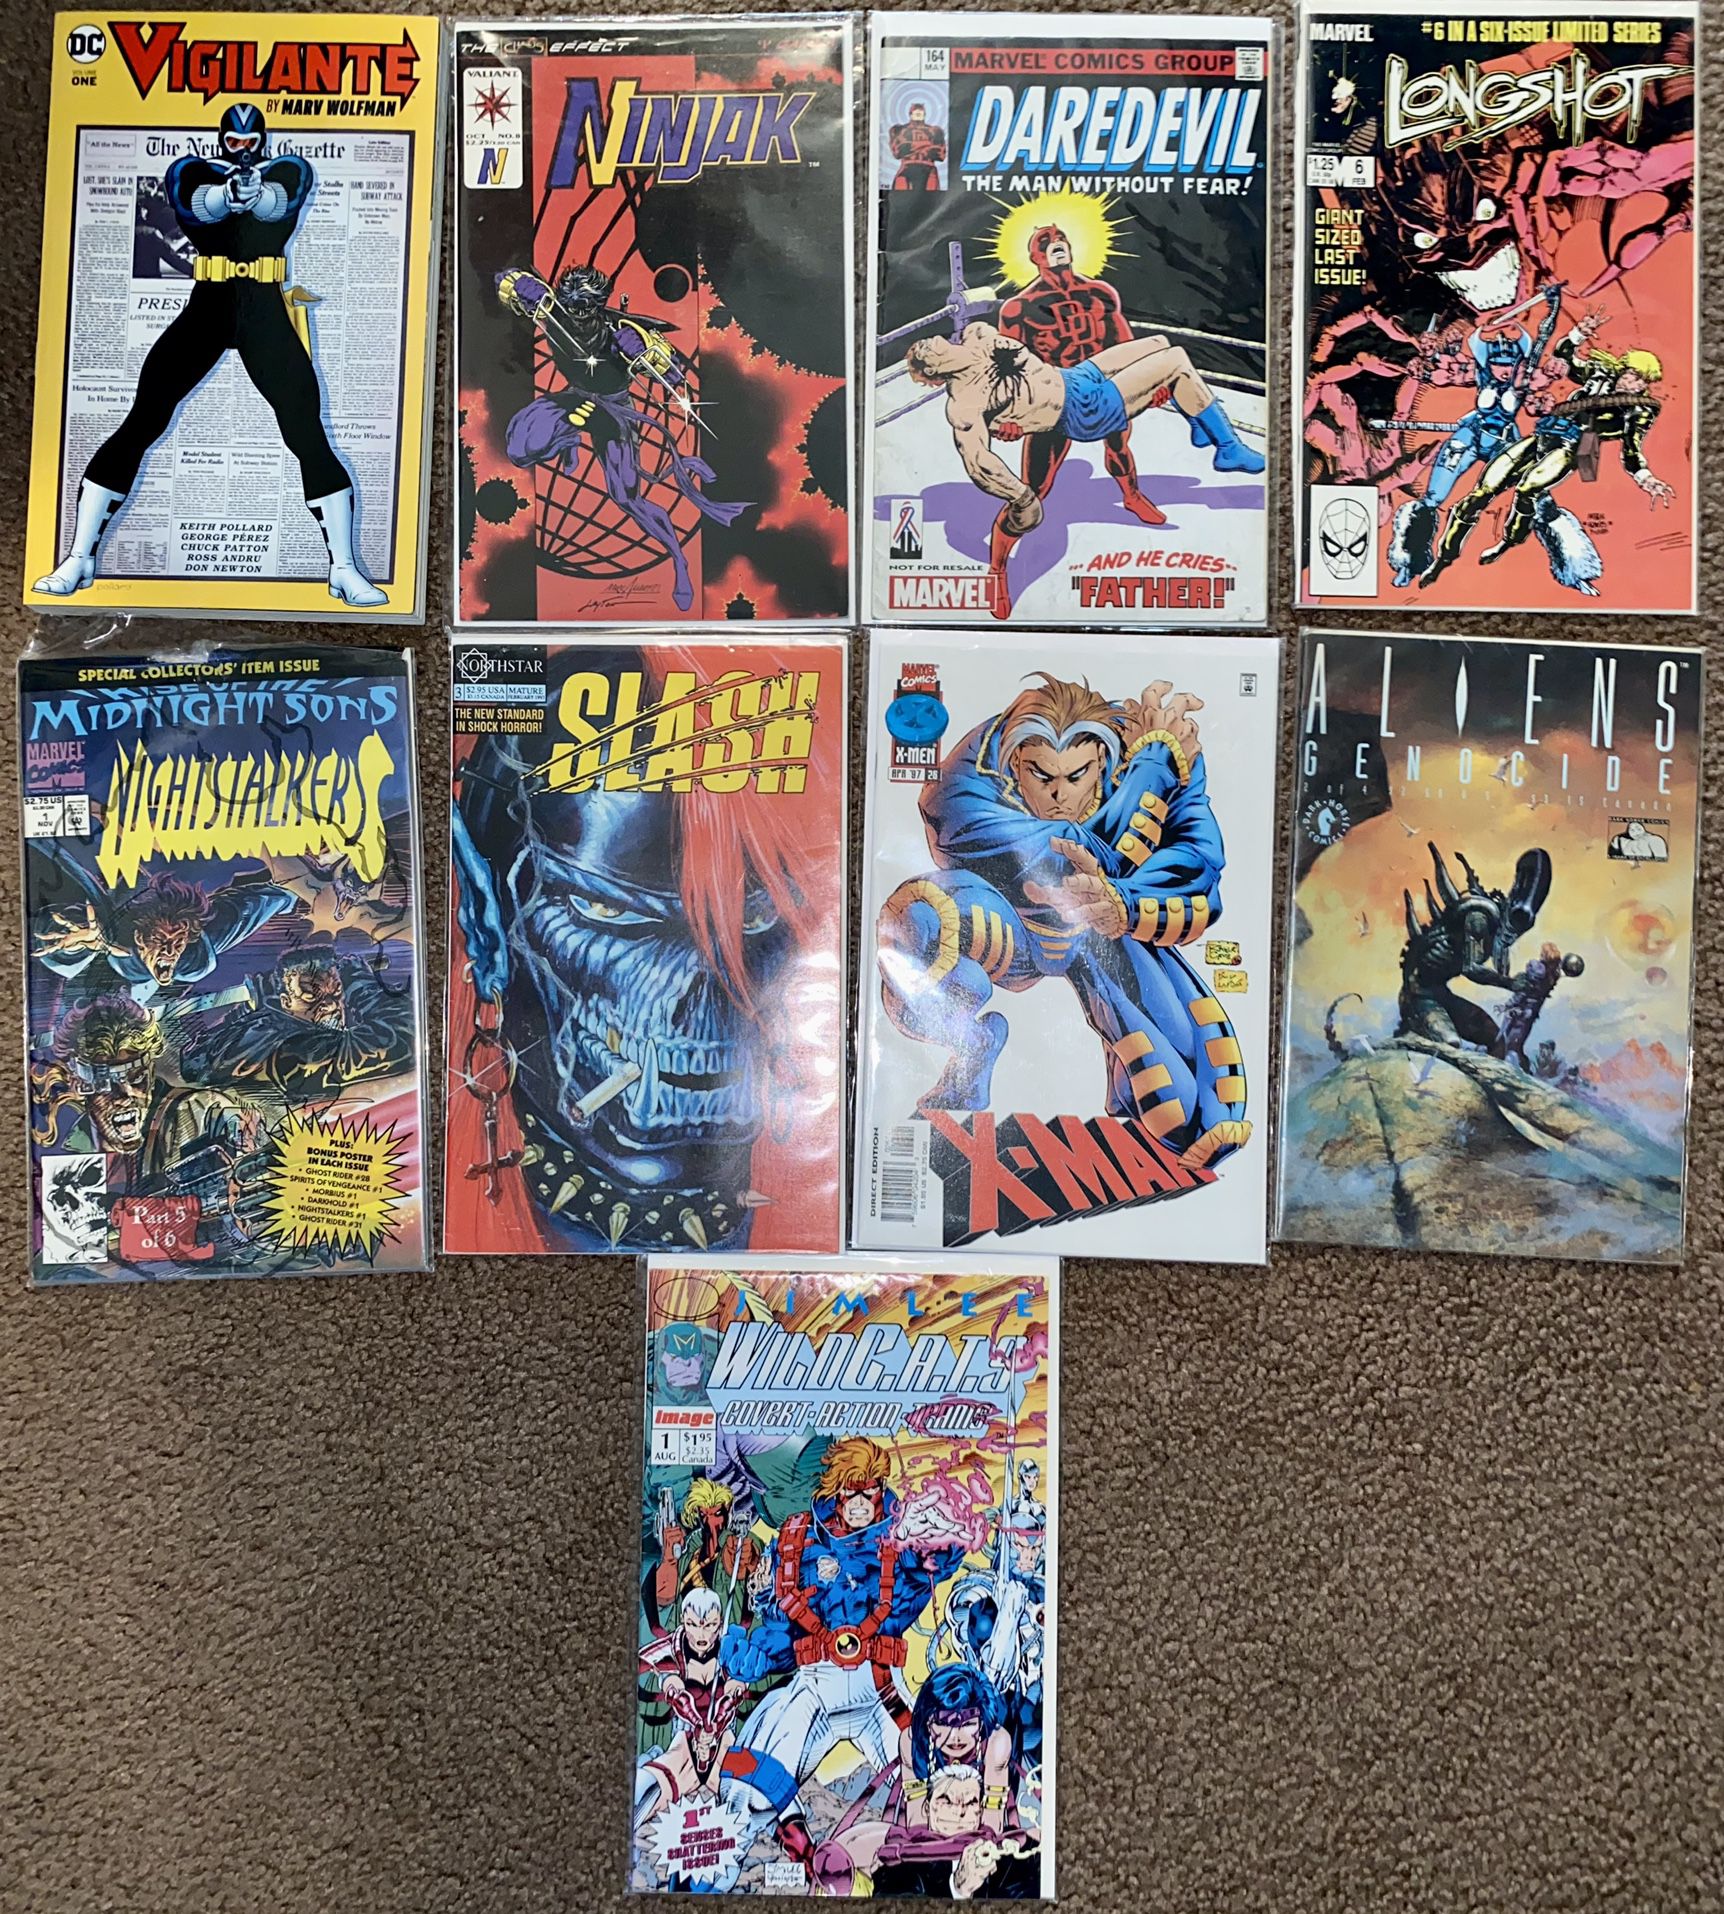 Comic Books $25 For All 